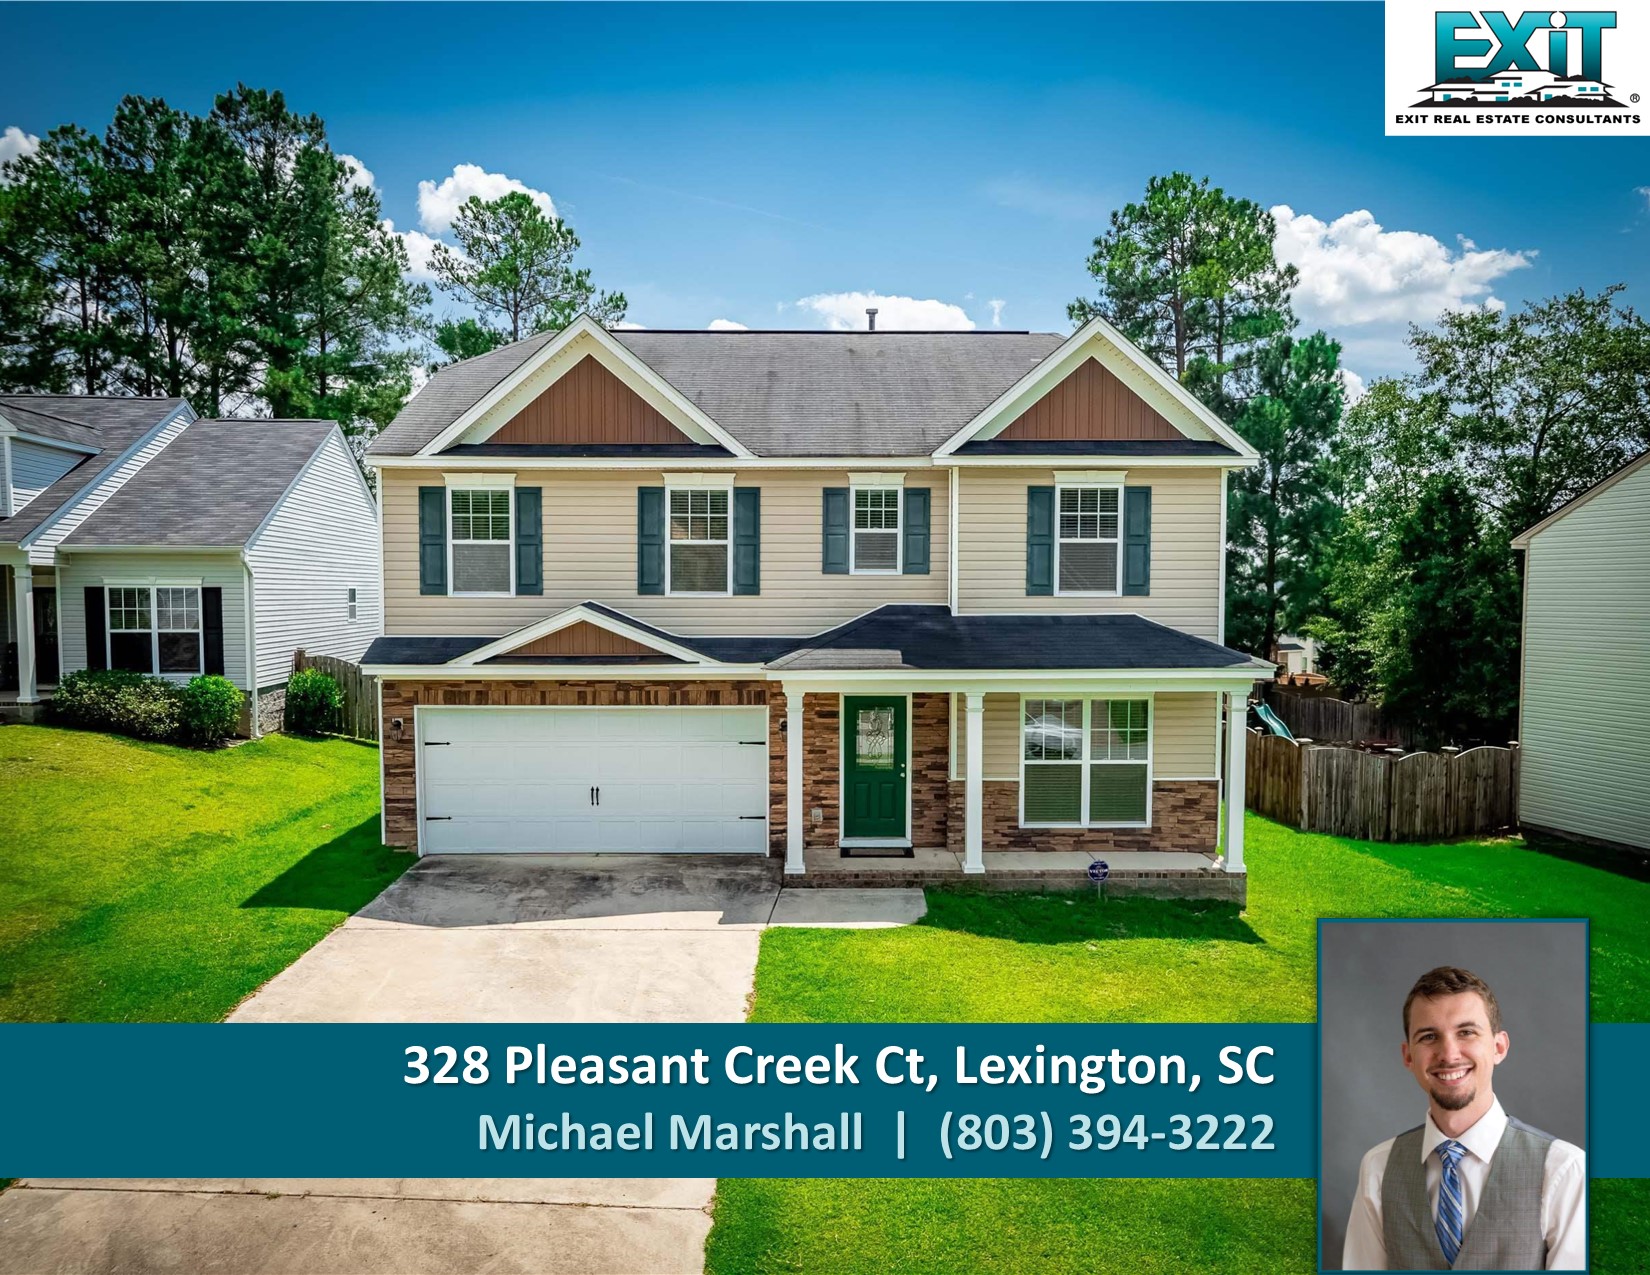 Just listed in Manors at White Knoll